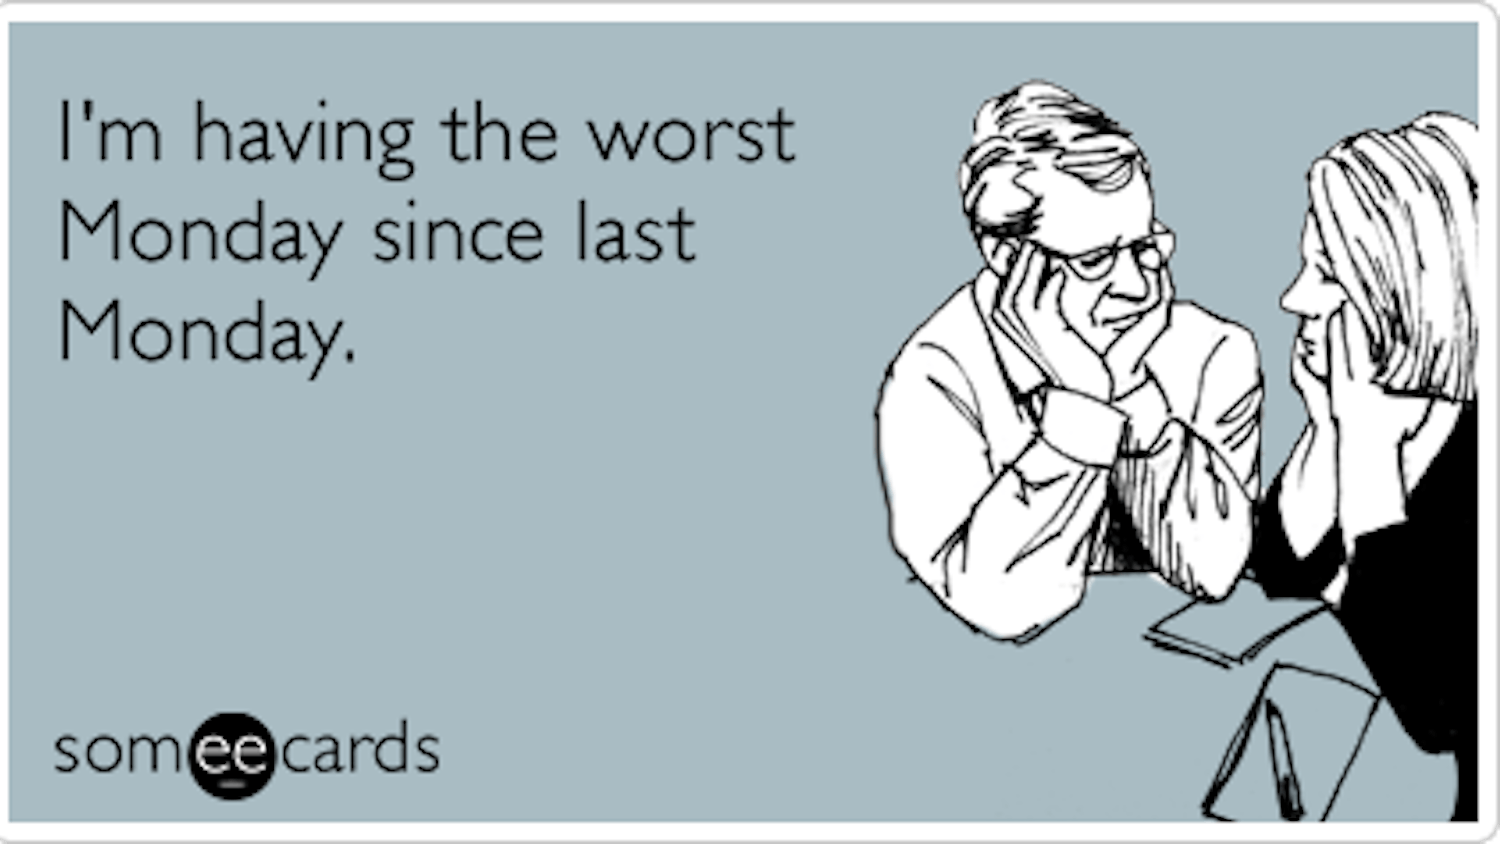 workplace-worst-monday-since-ecards-someecards-2